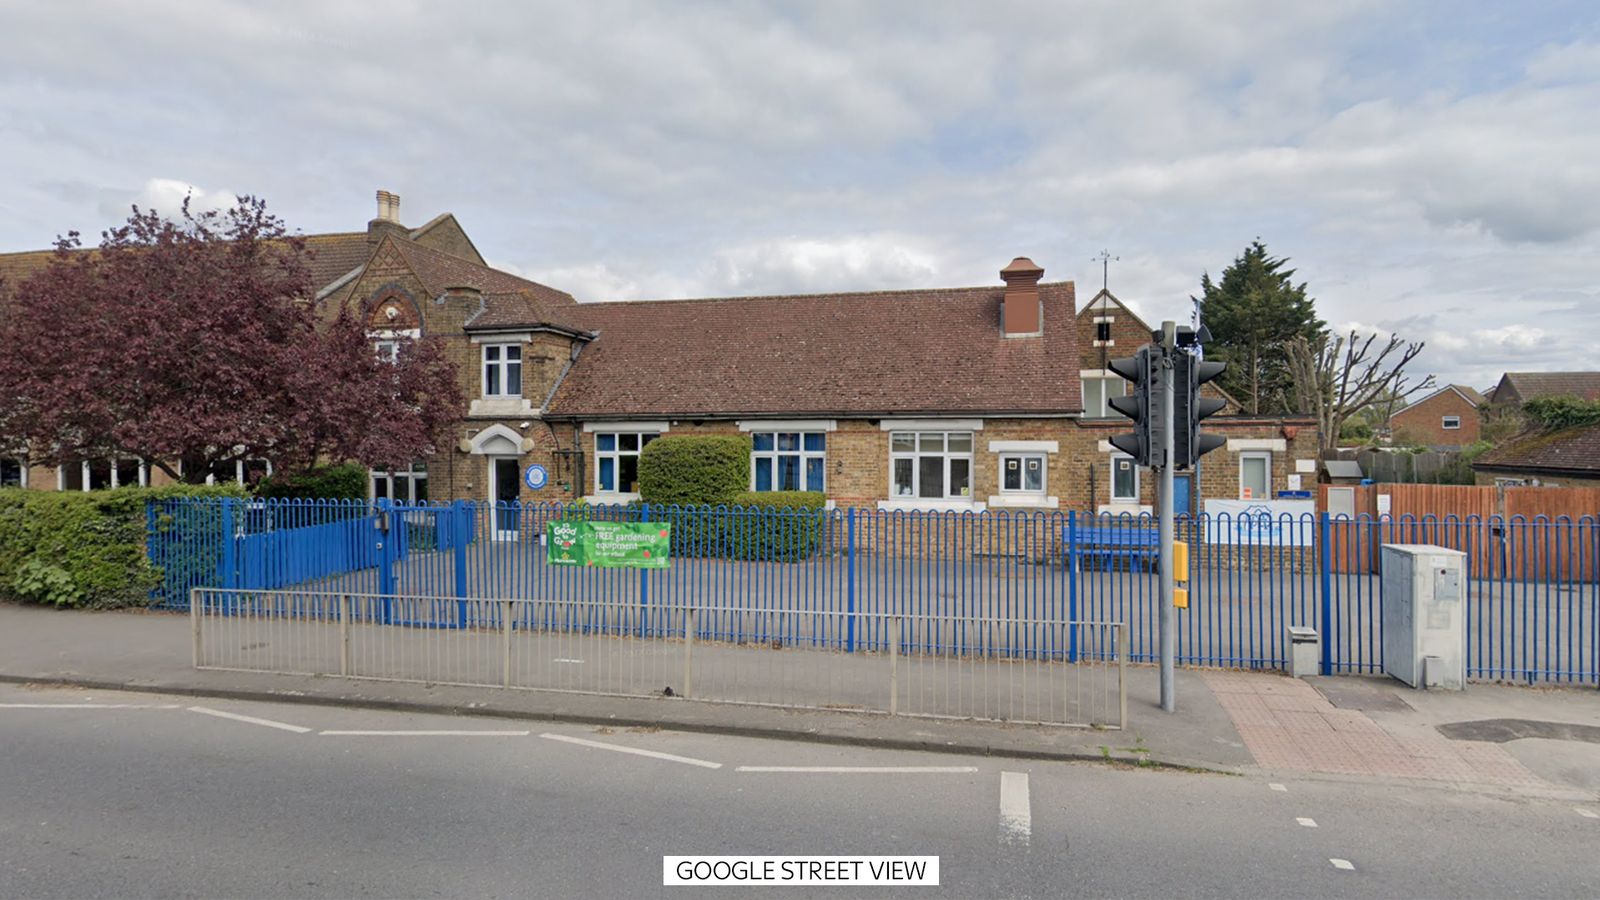 Six-year-old dies after Strep A bacteria outbreak at Surrey primary school